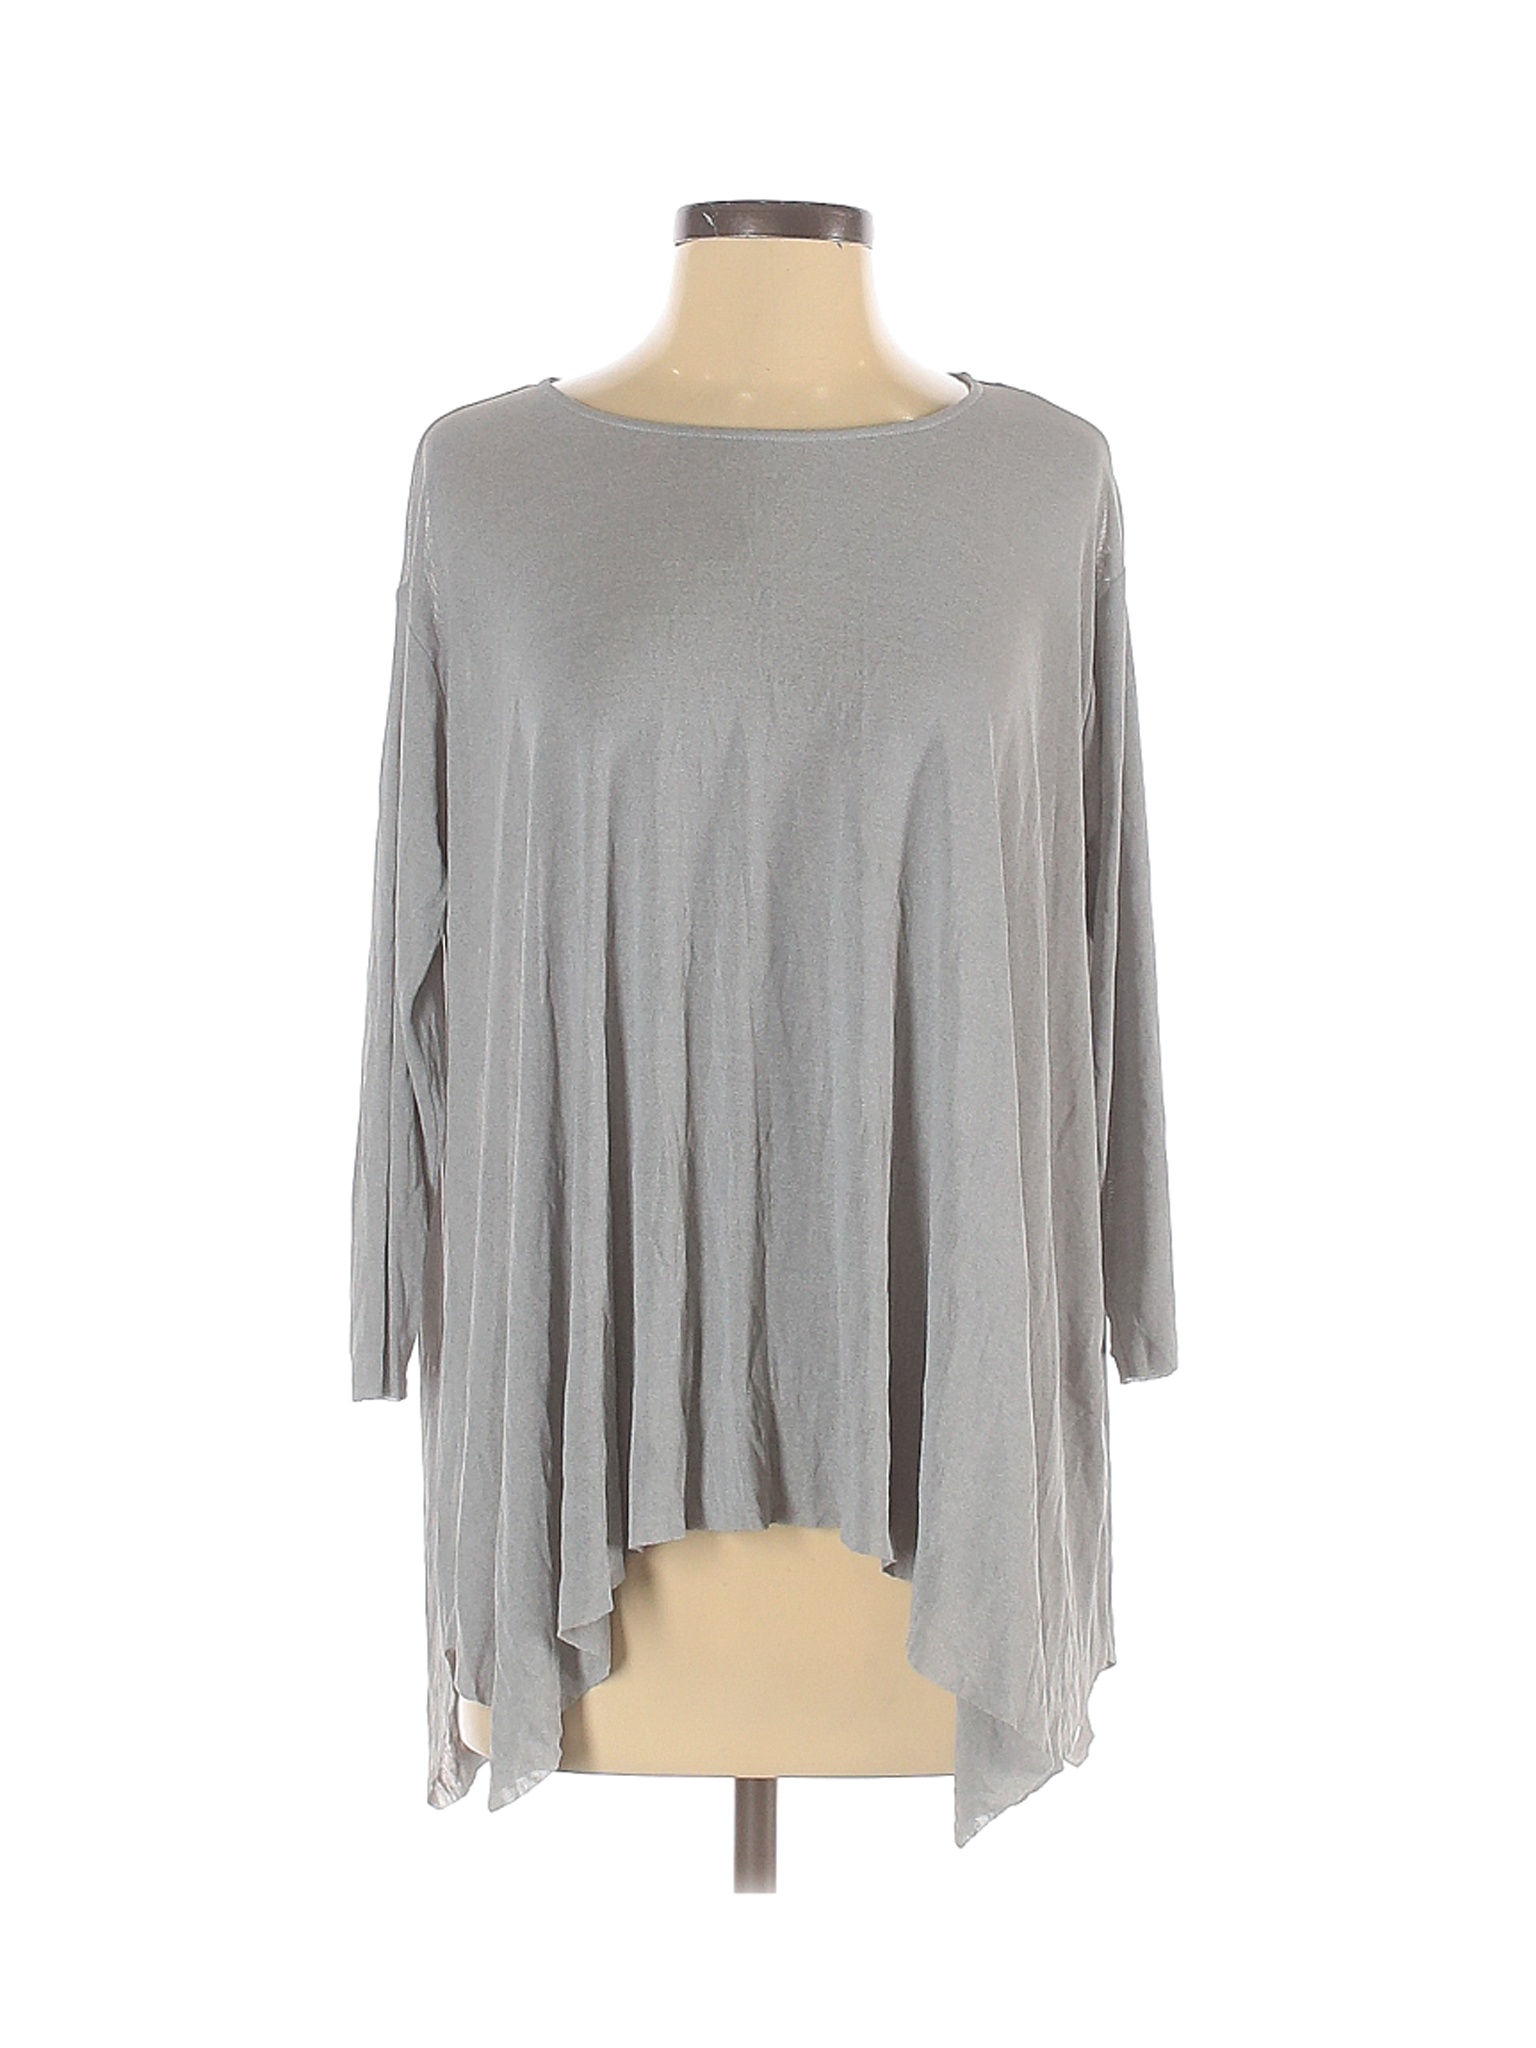 Cos Gray 3/4 Sleeve Top Size S - 56% off | thredUP